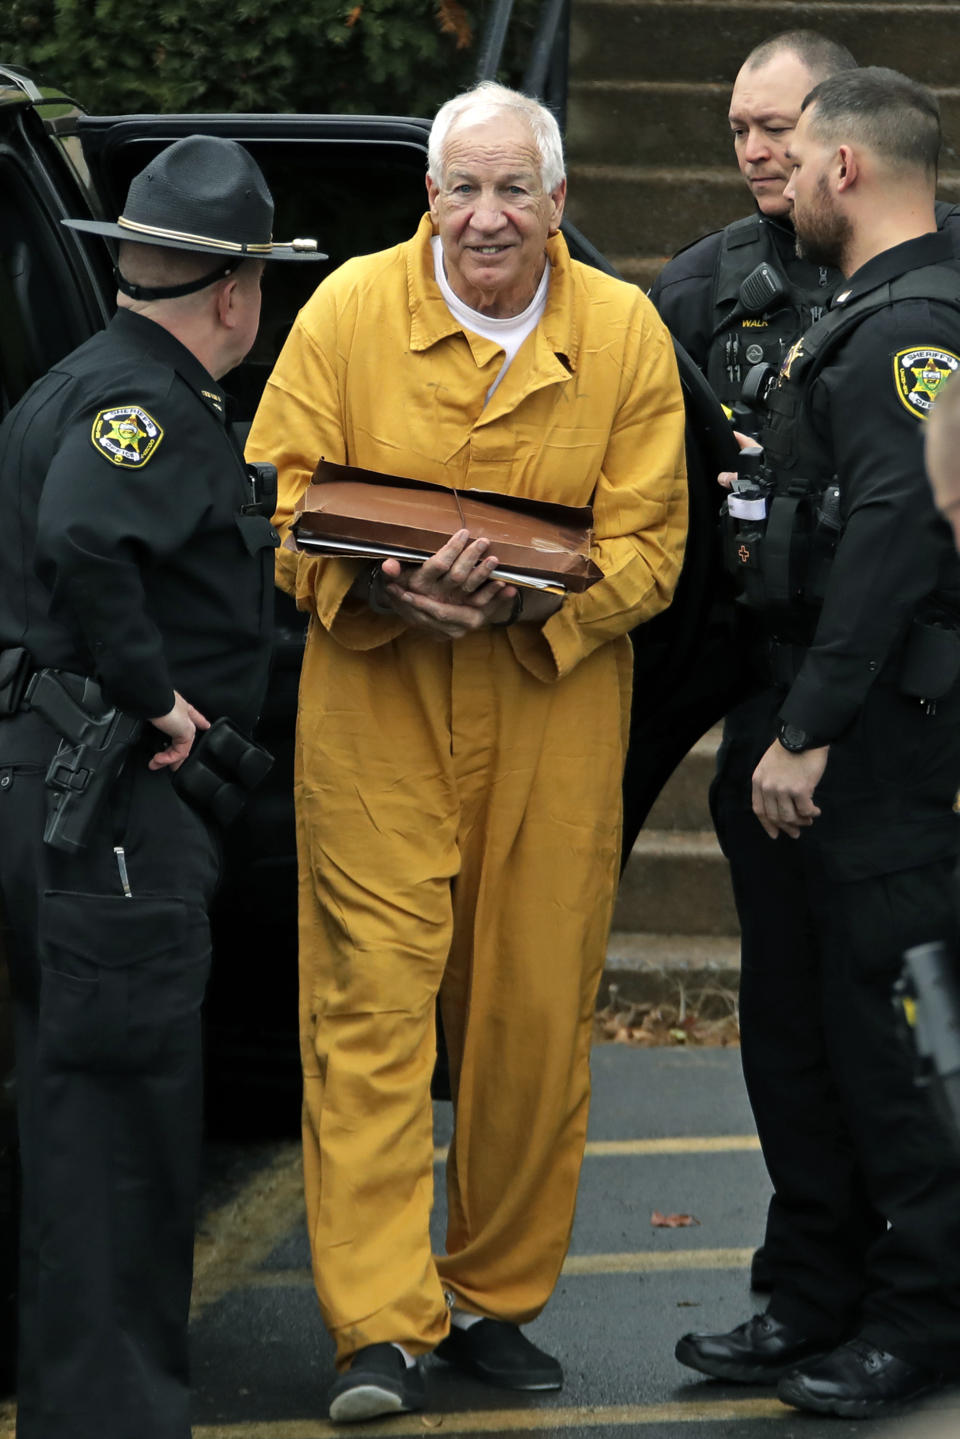 Former Penn State University assistant football coach Jerry Sandusky, center, arrives at the Centre County Courthouse, Friday, Nov. 22, 2019, in Bellefonte, Pa., to be resentenced after an appeals court said mandatory minimum sentences had been improperly applied against him. (AP Photo/Gene J. Puskar)